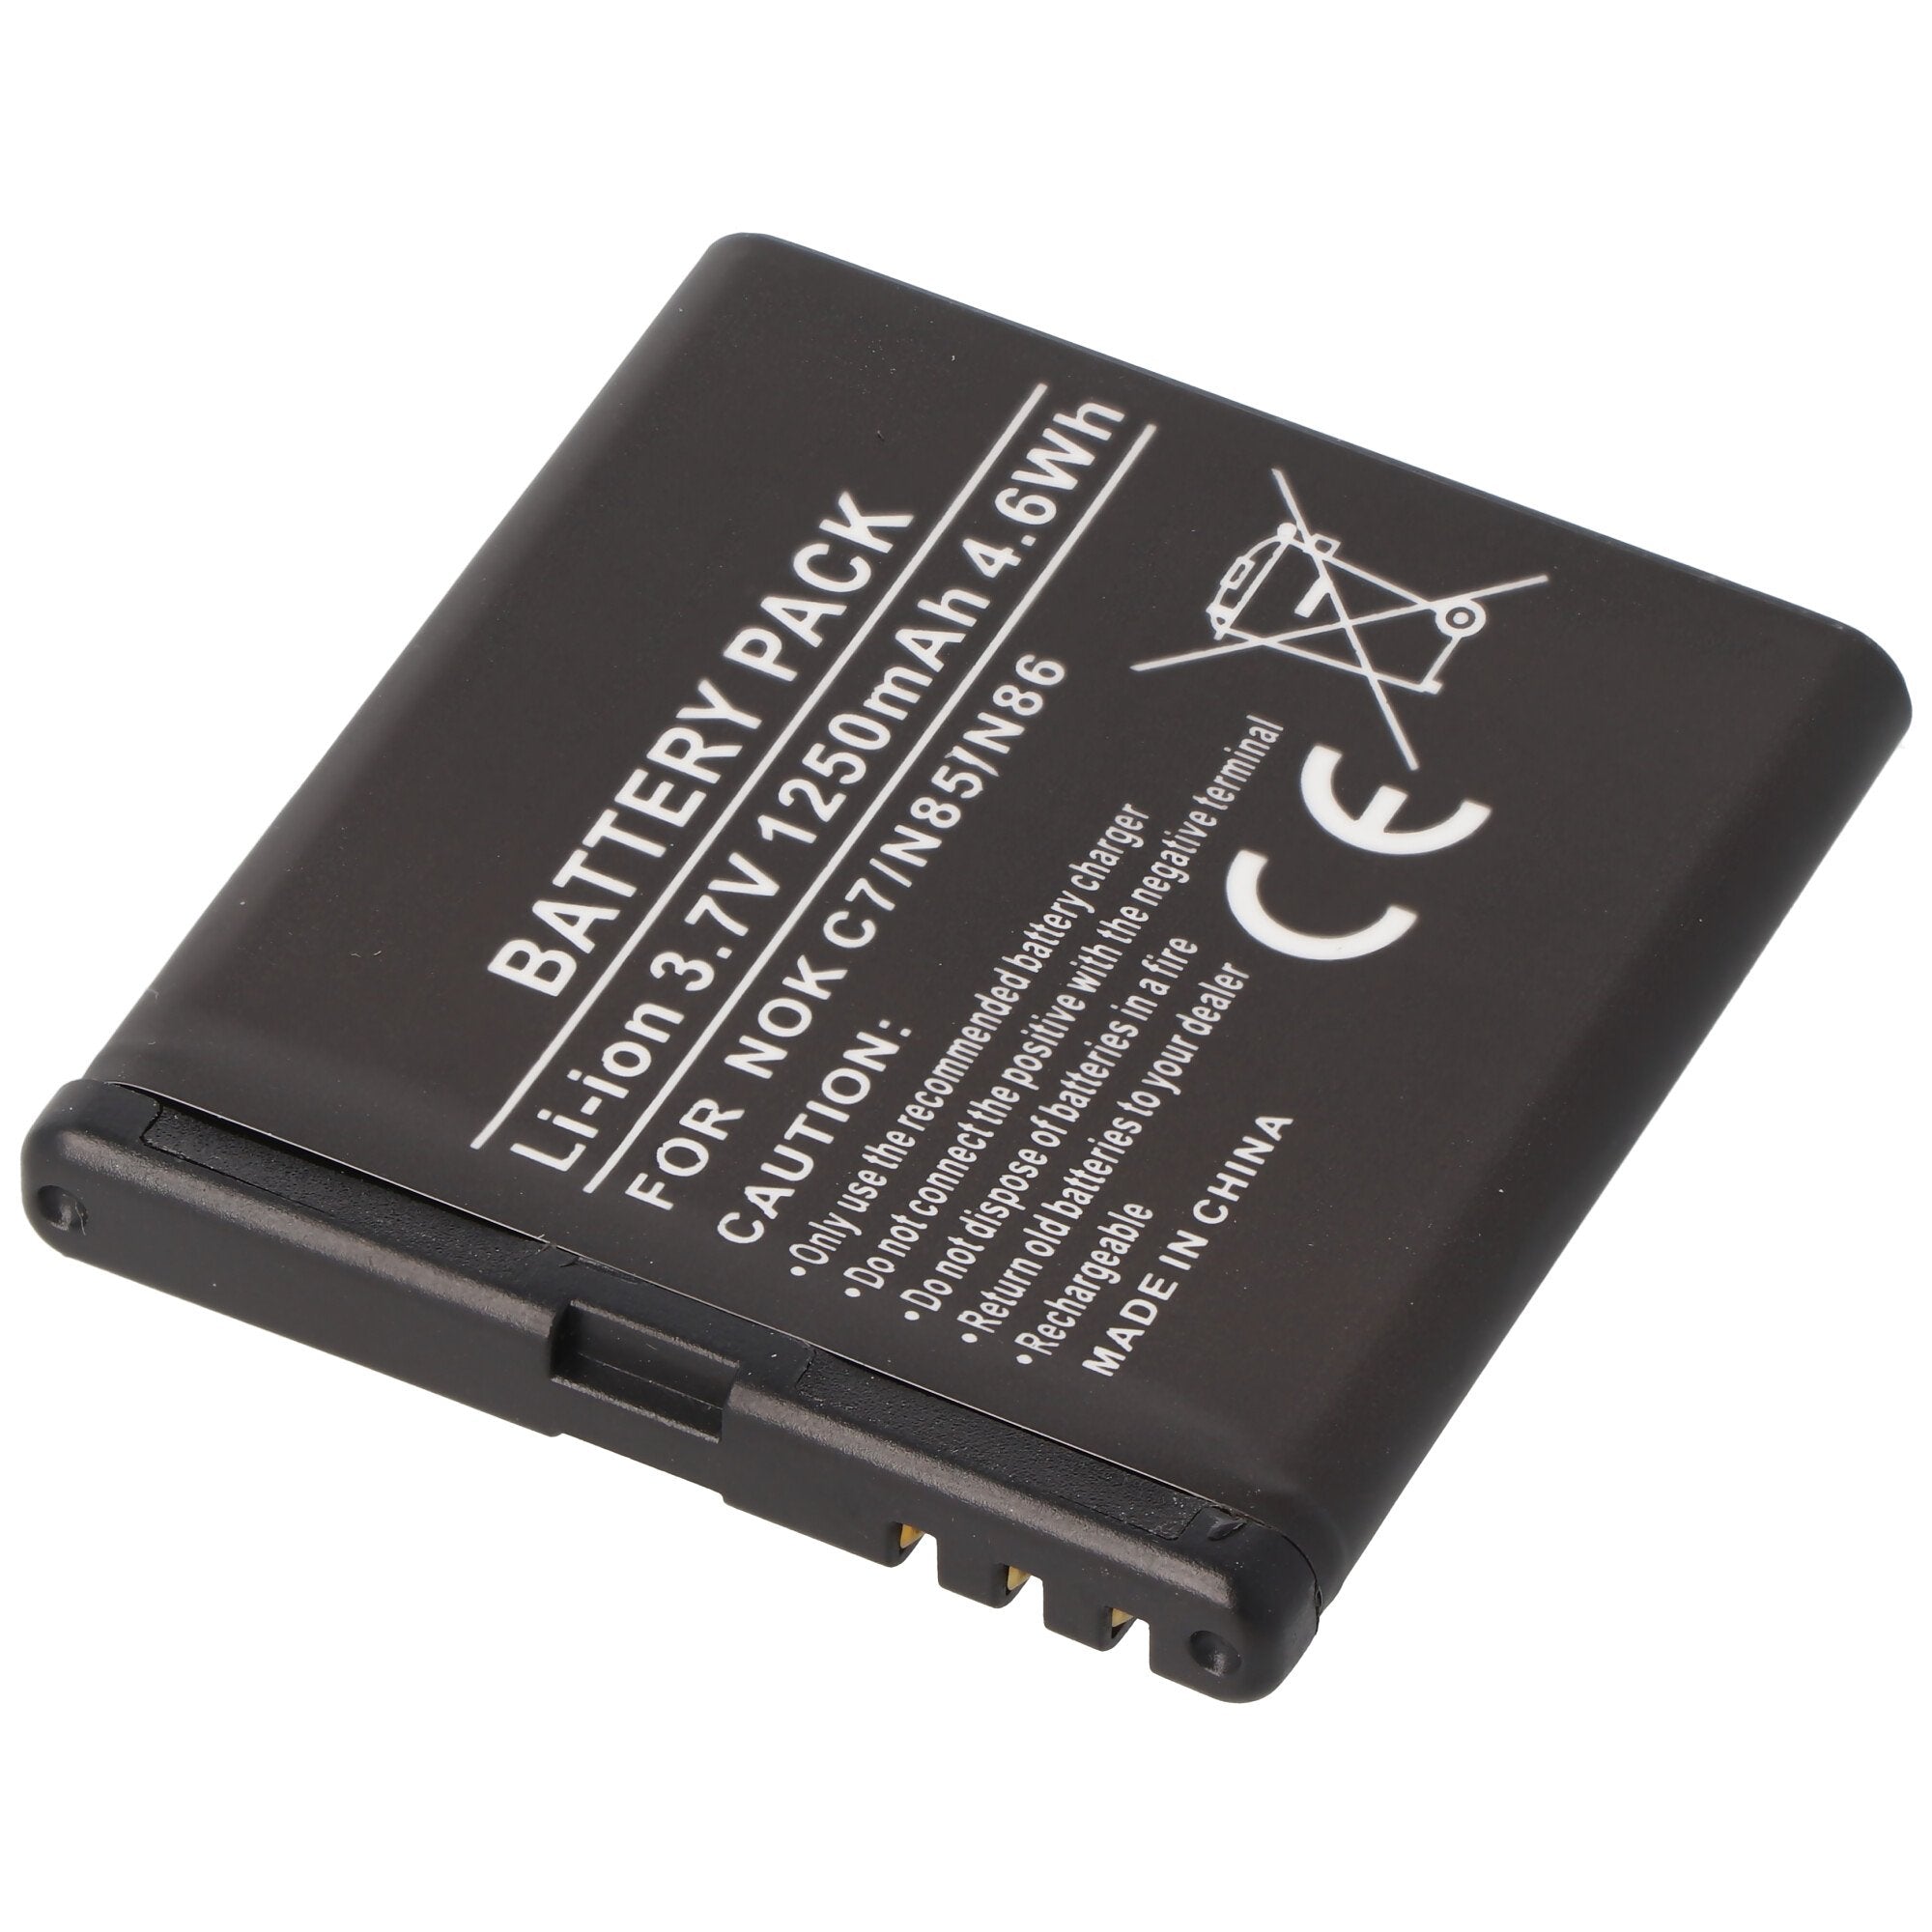 AccuCell battery suitable for Nokia N85, N86 similar to BL-5K